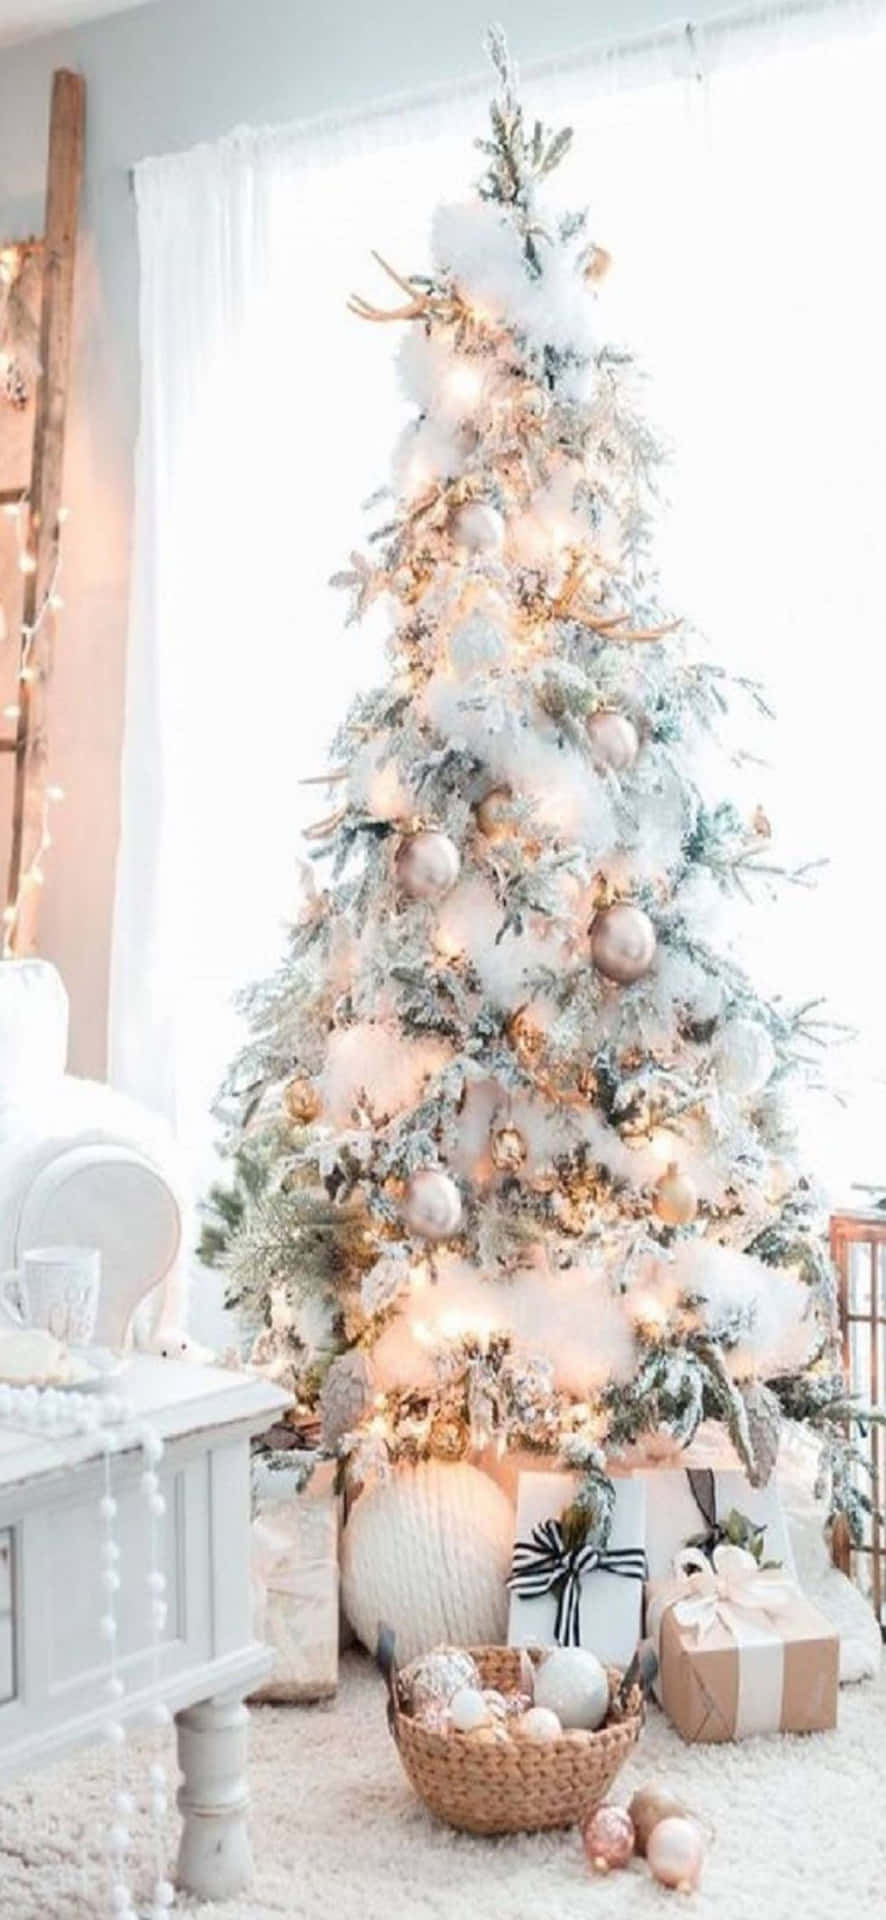 Download A White Christmas Tree With White Decorations In A Living Room ...